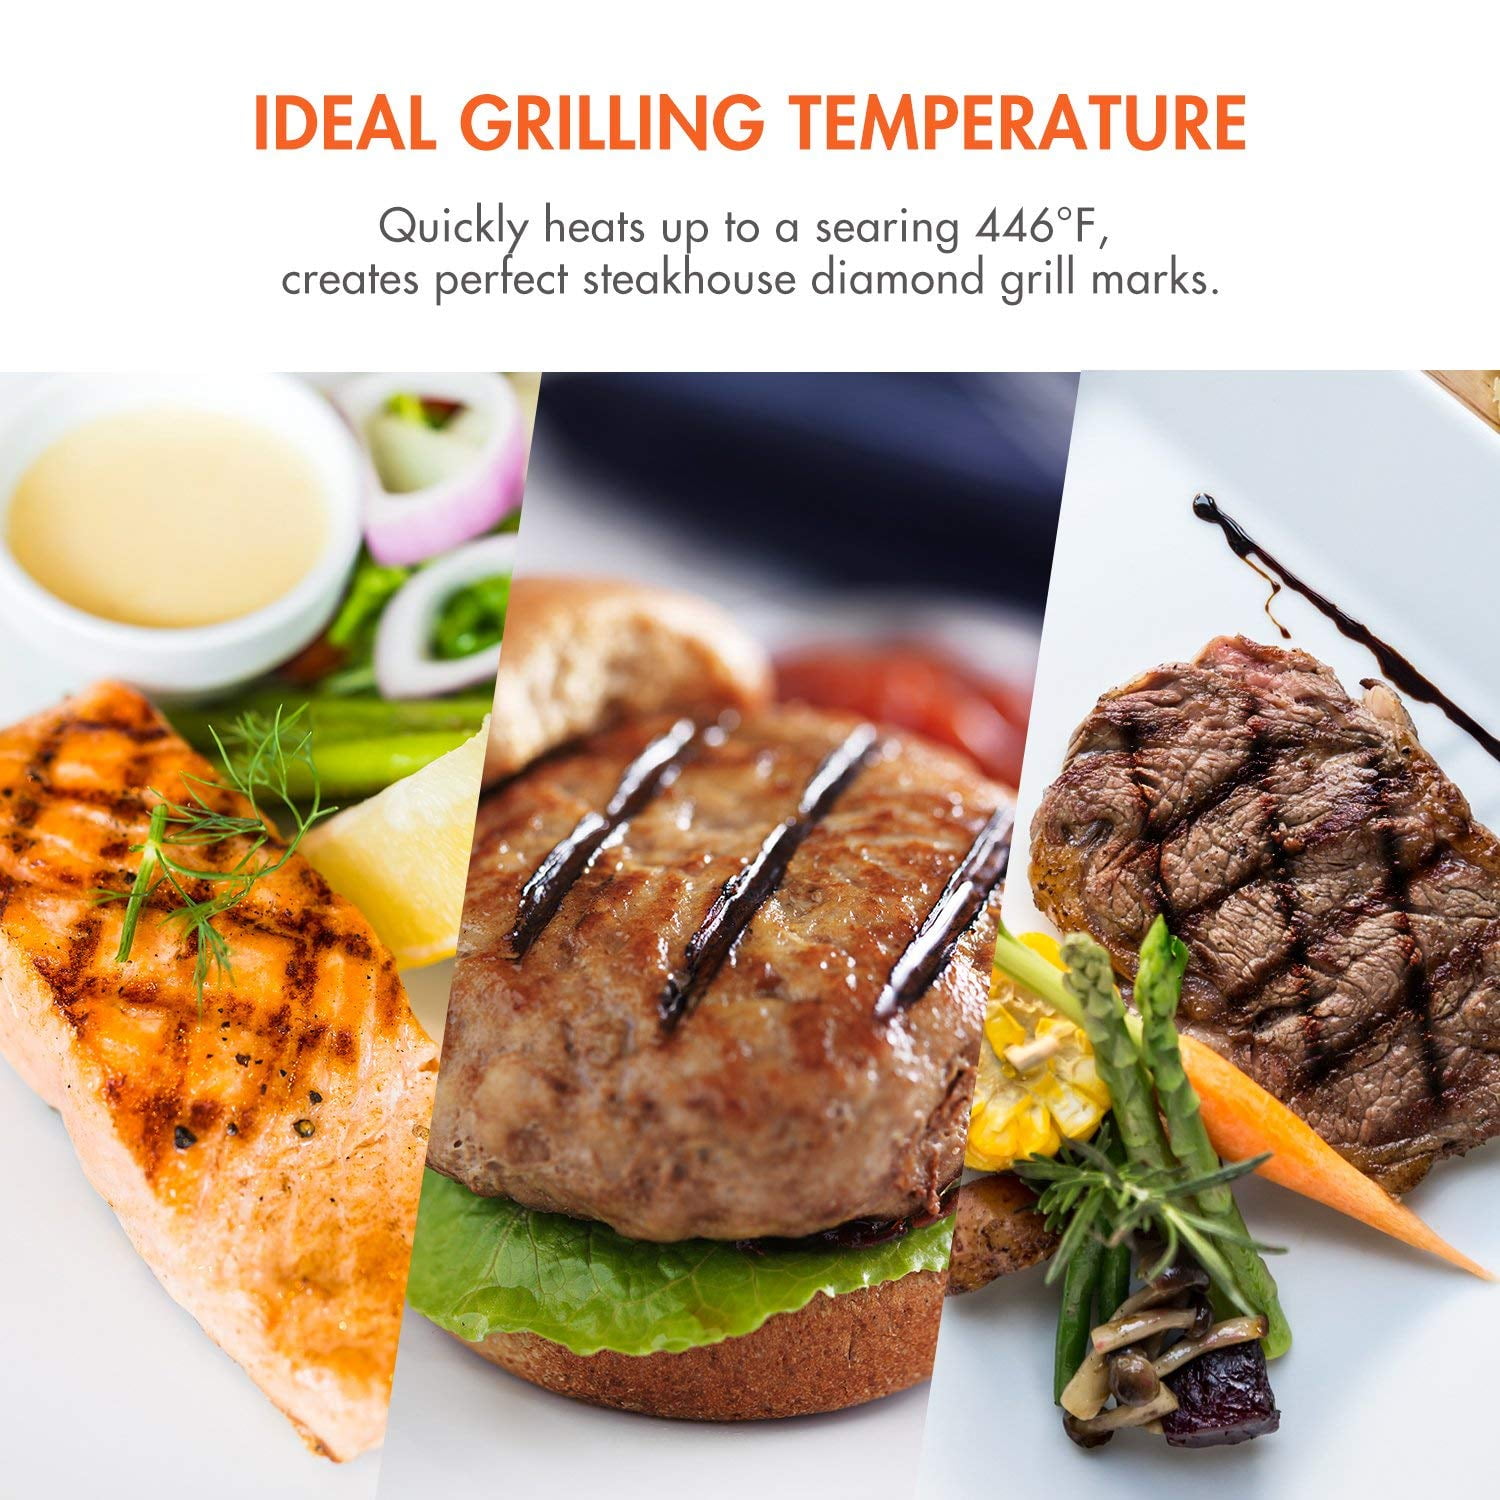 Cooker Review: Tenergy Redigrill Smokeless Infrared Grill - Grill Product  Reviews - Grillseeker